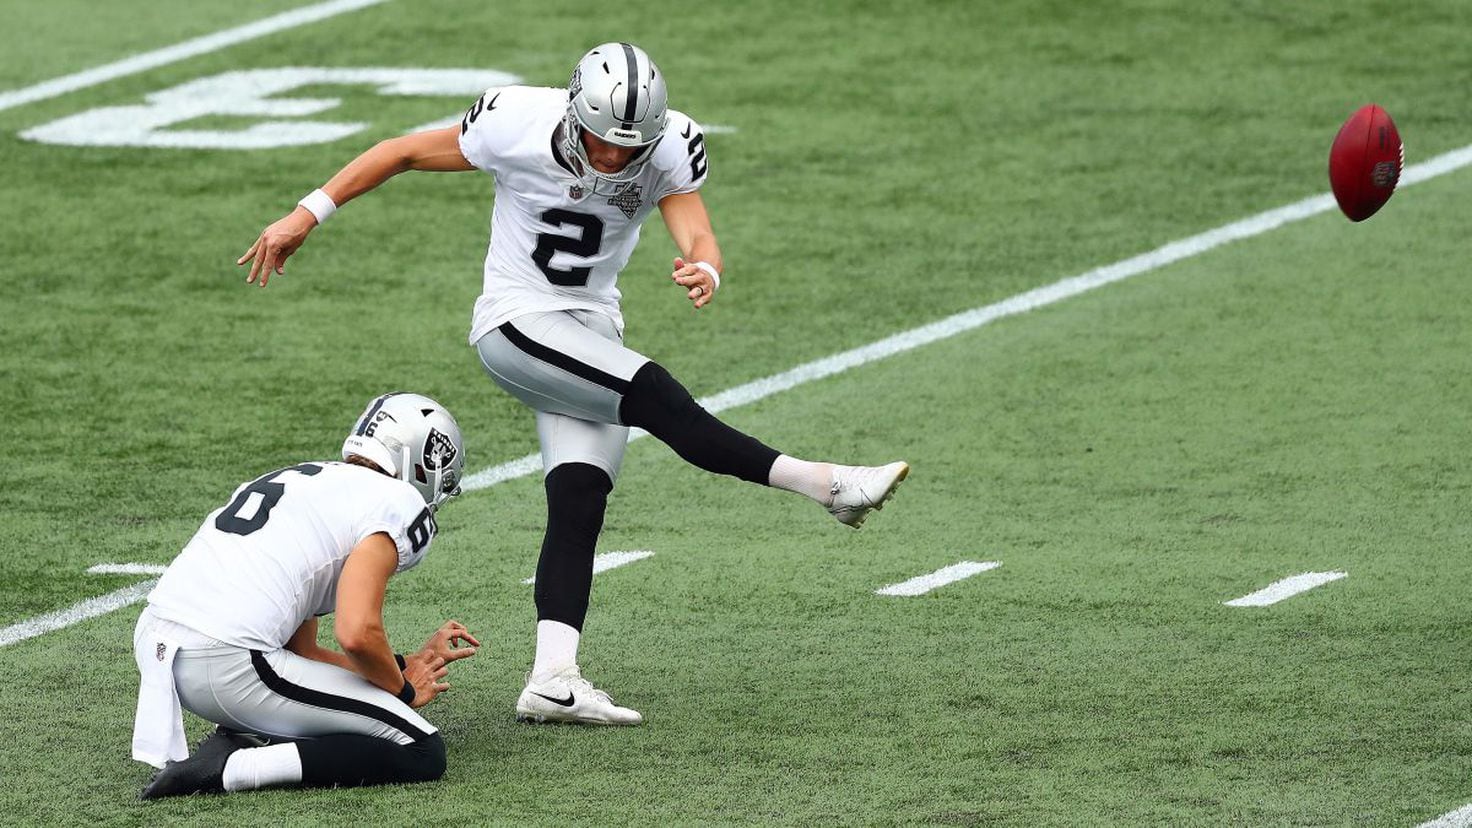 NFL kickoff rule change What advantage did the Raiders have? AS USA